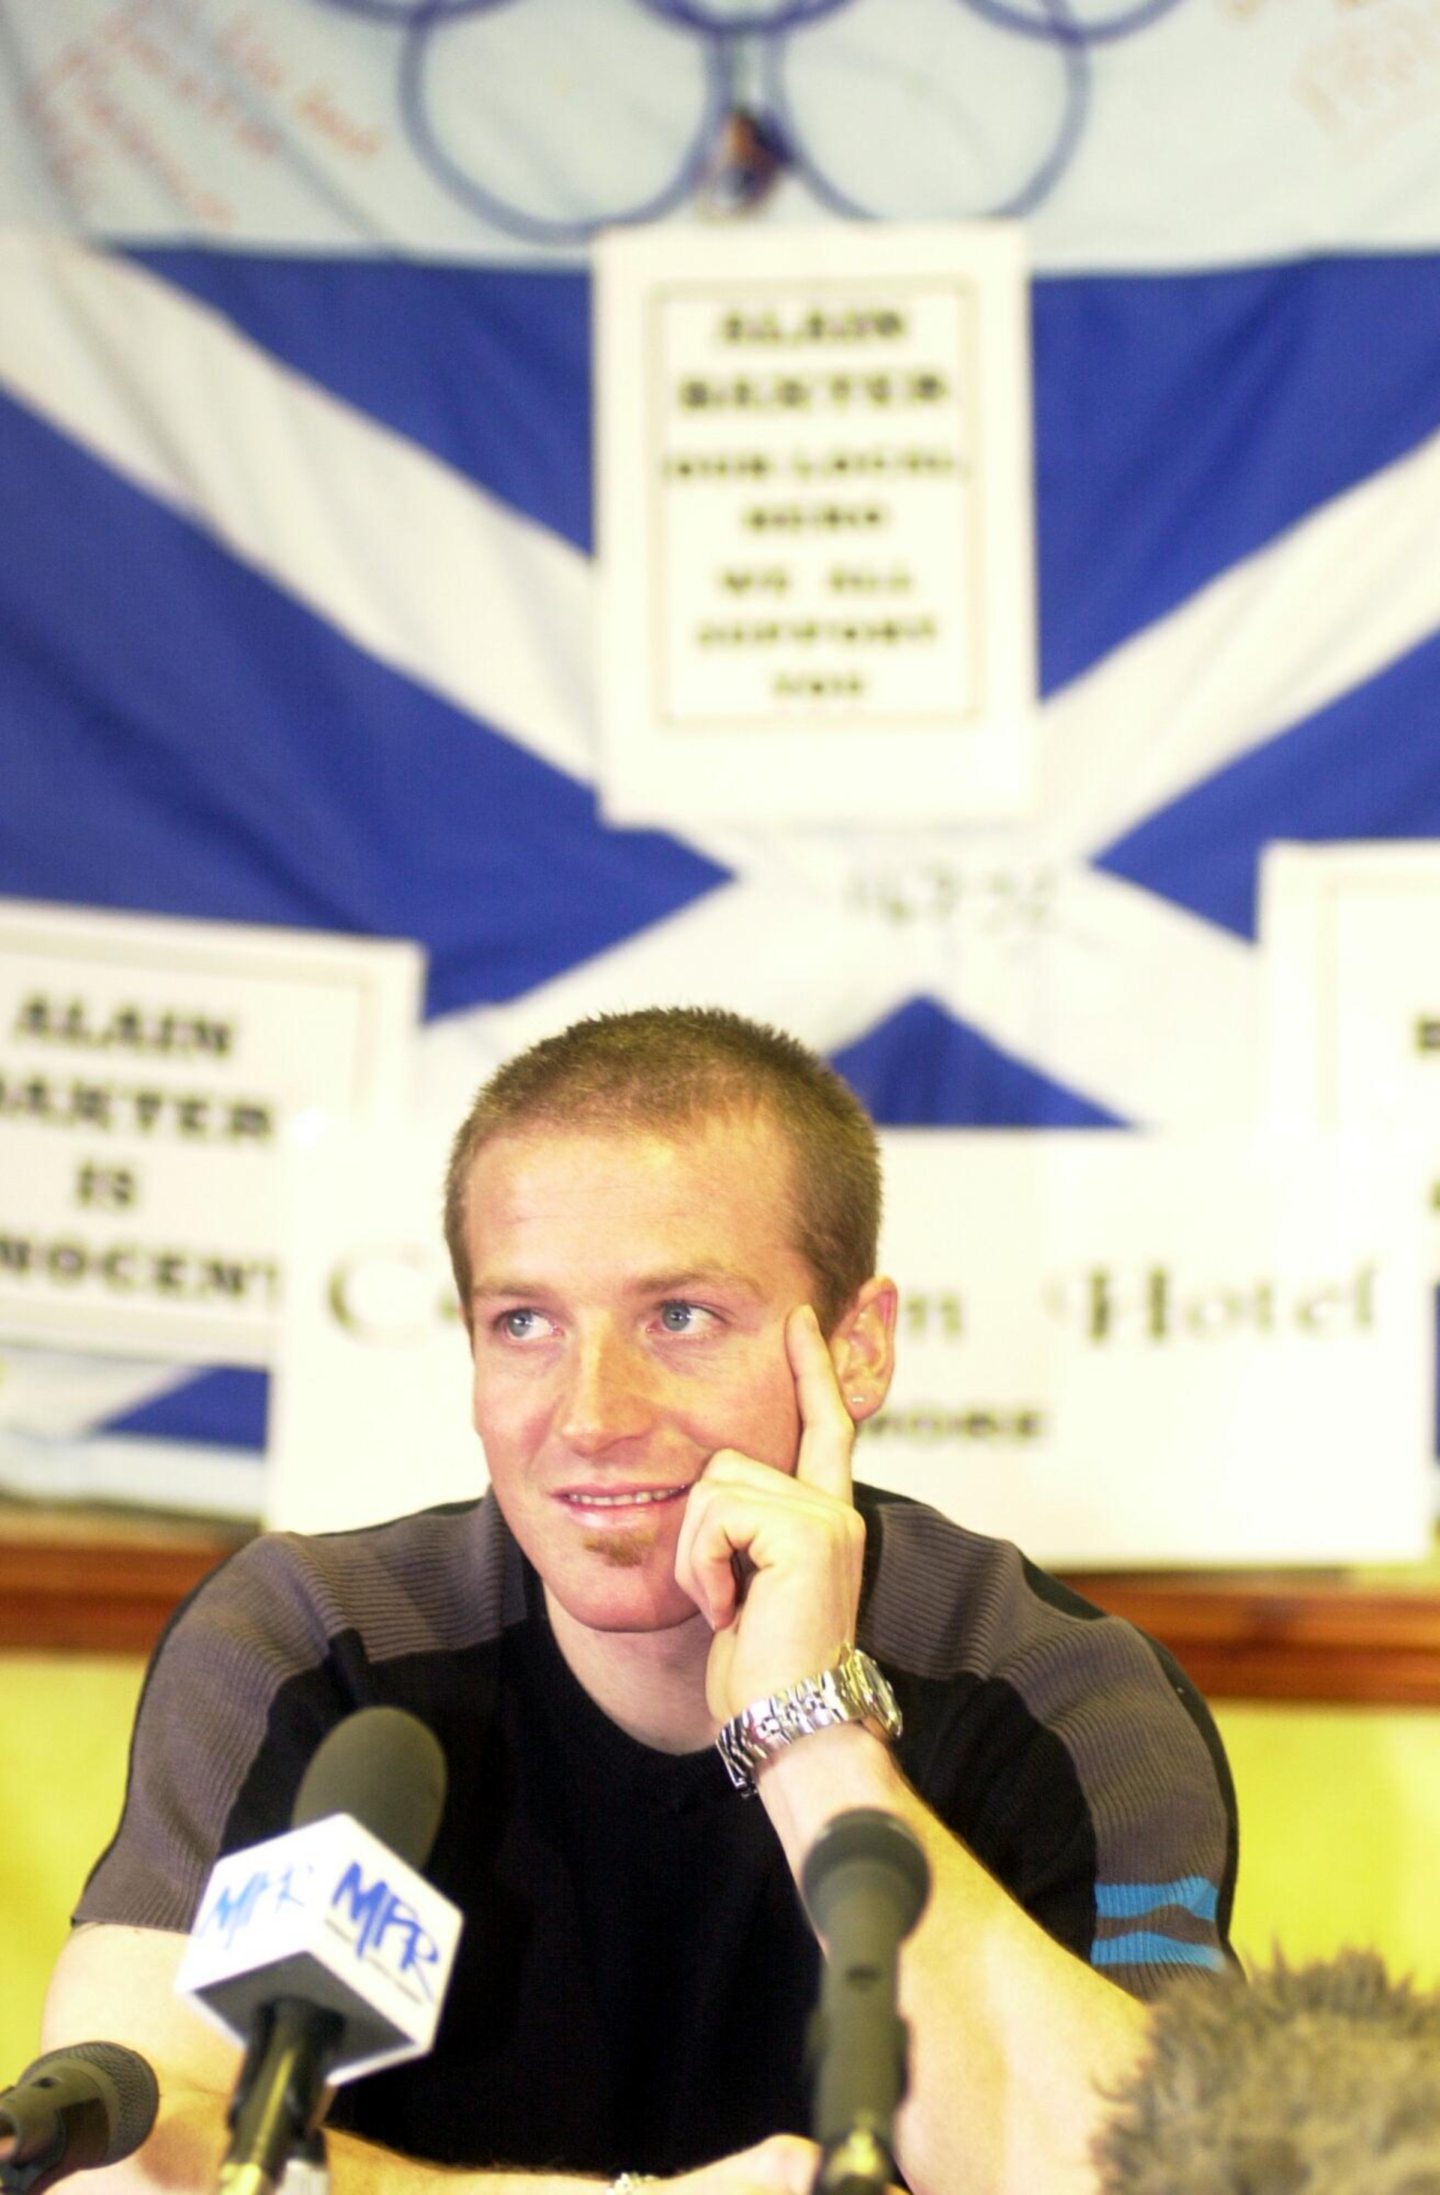 Alain Baxter was surrounded by messages of support at an emotional press conference in Aviemore in 2002.